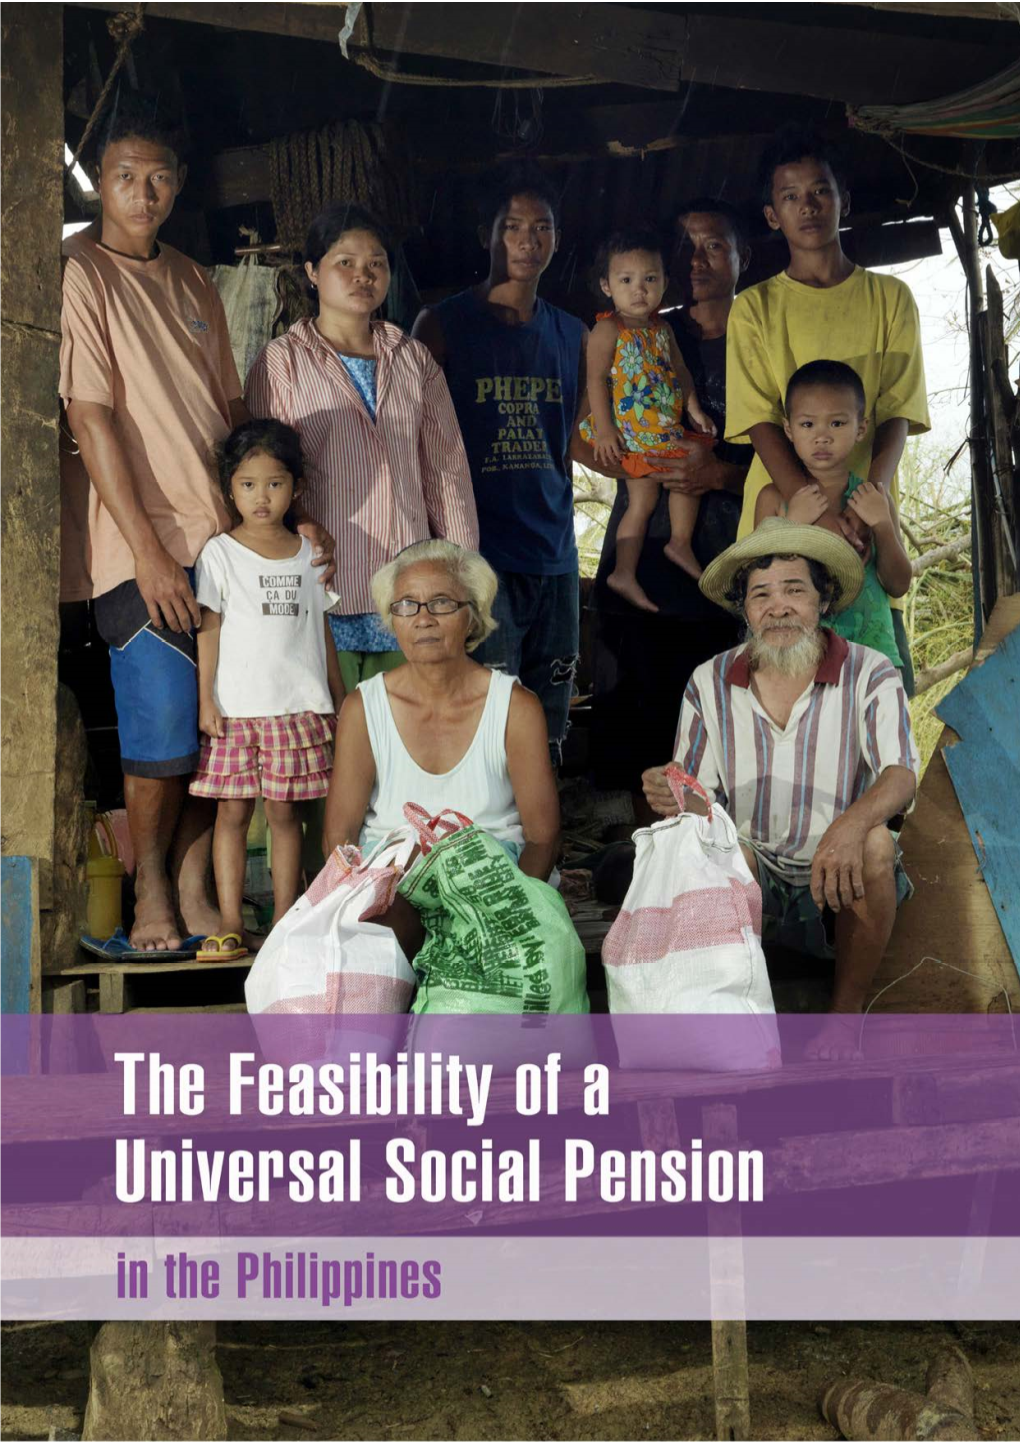 The Feasibility of a Universal Social Pension in the Philippines